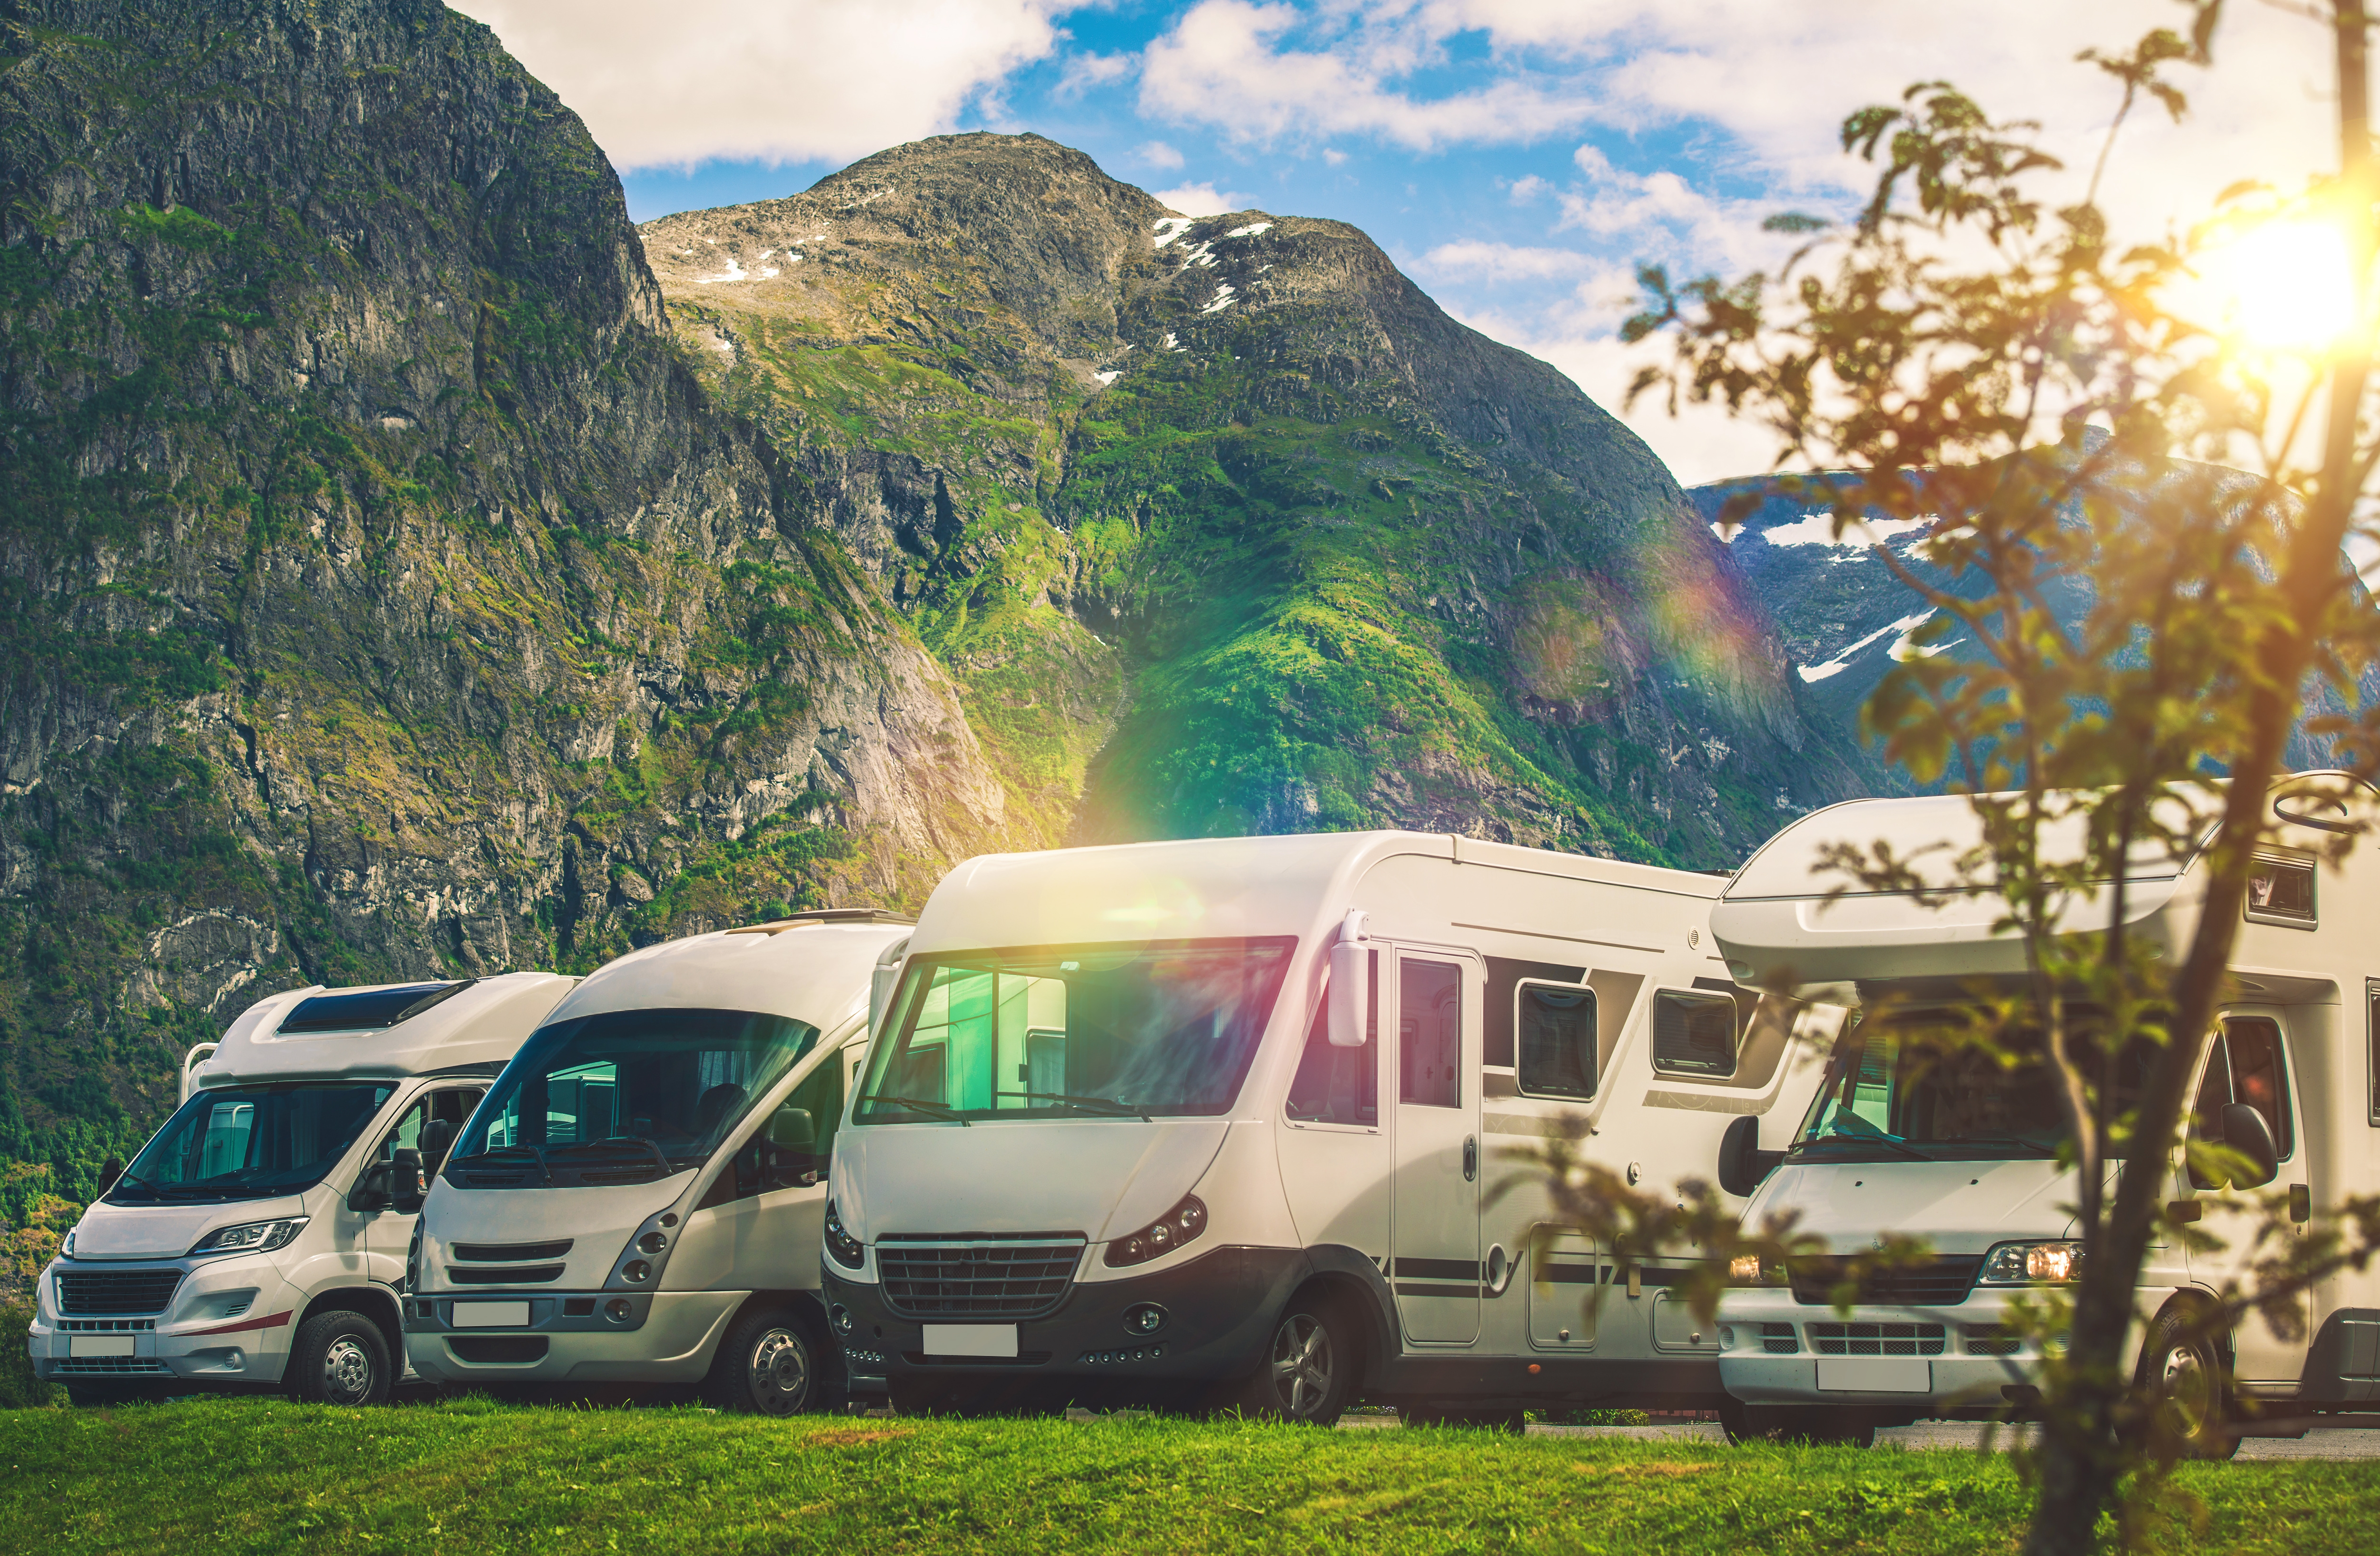 How To Choose The Best RV For You